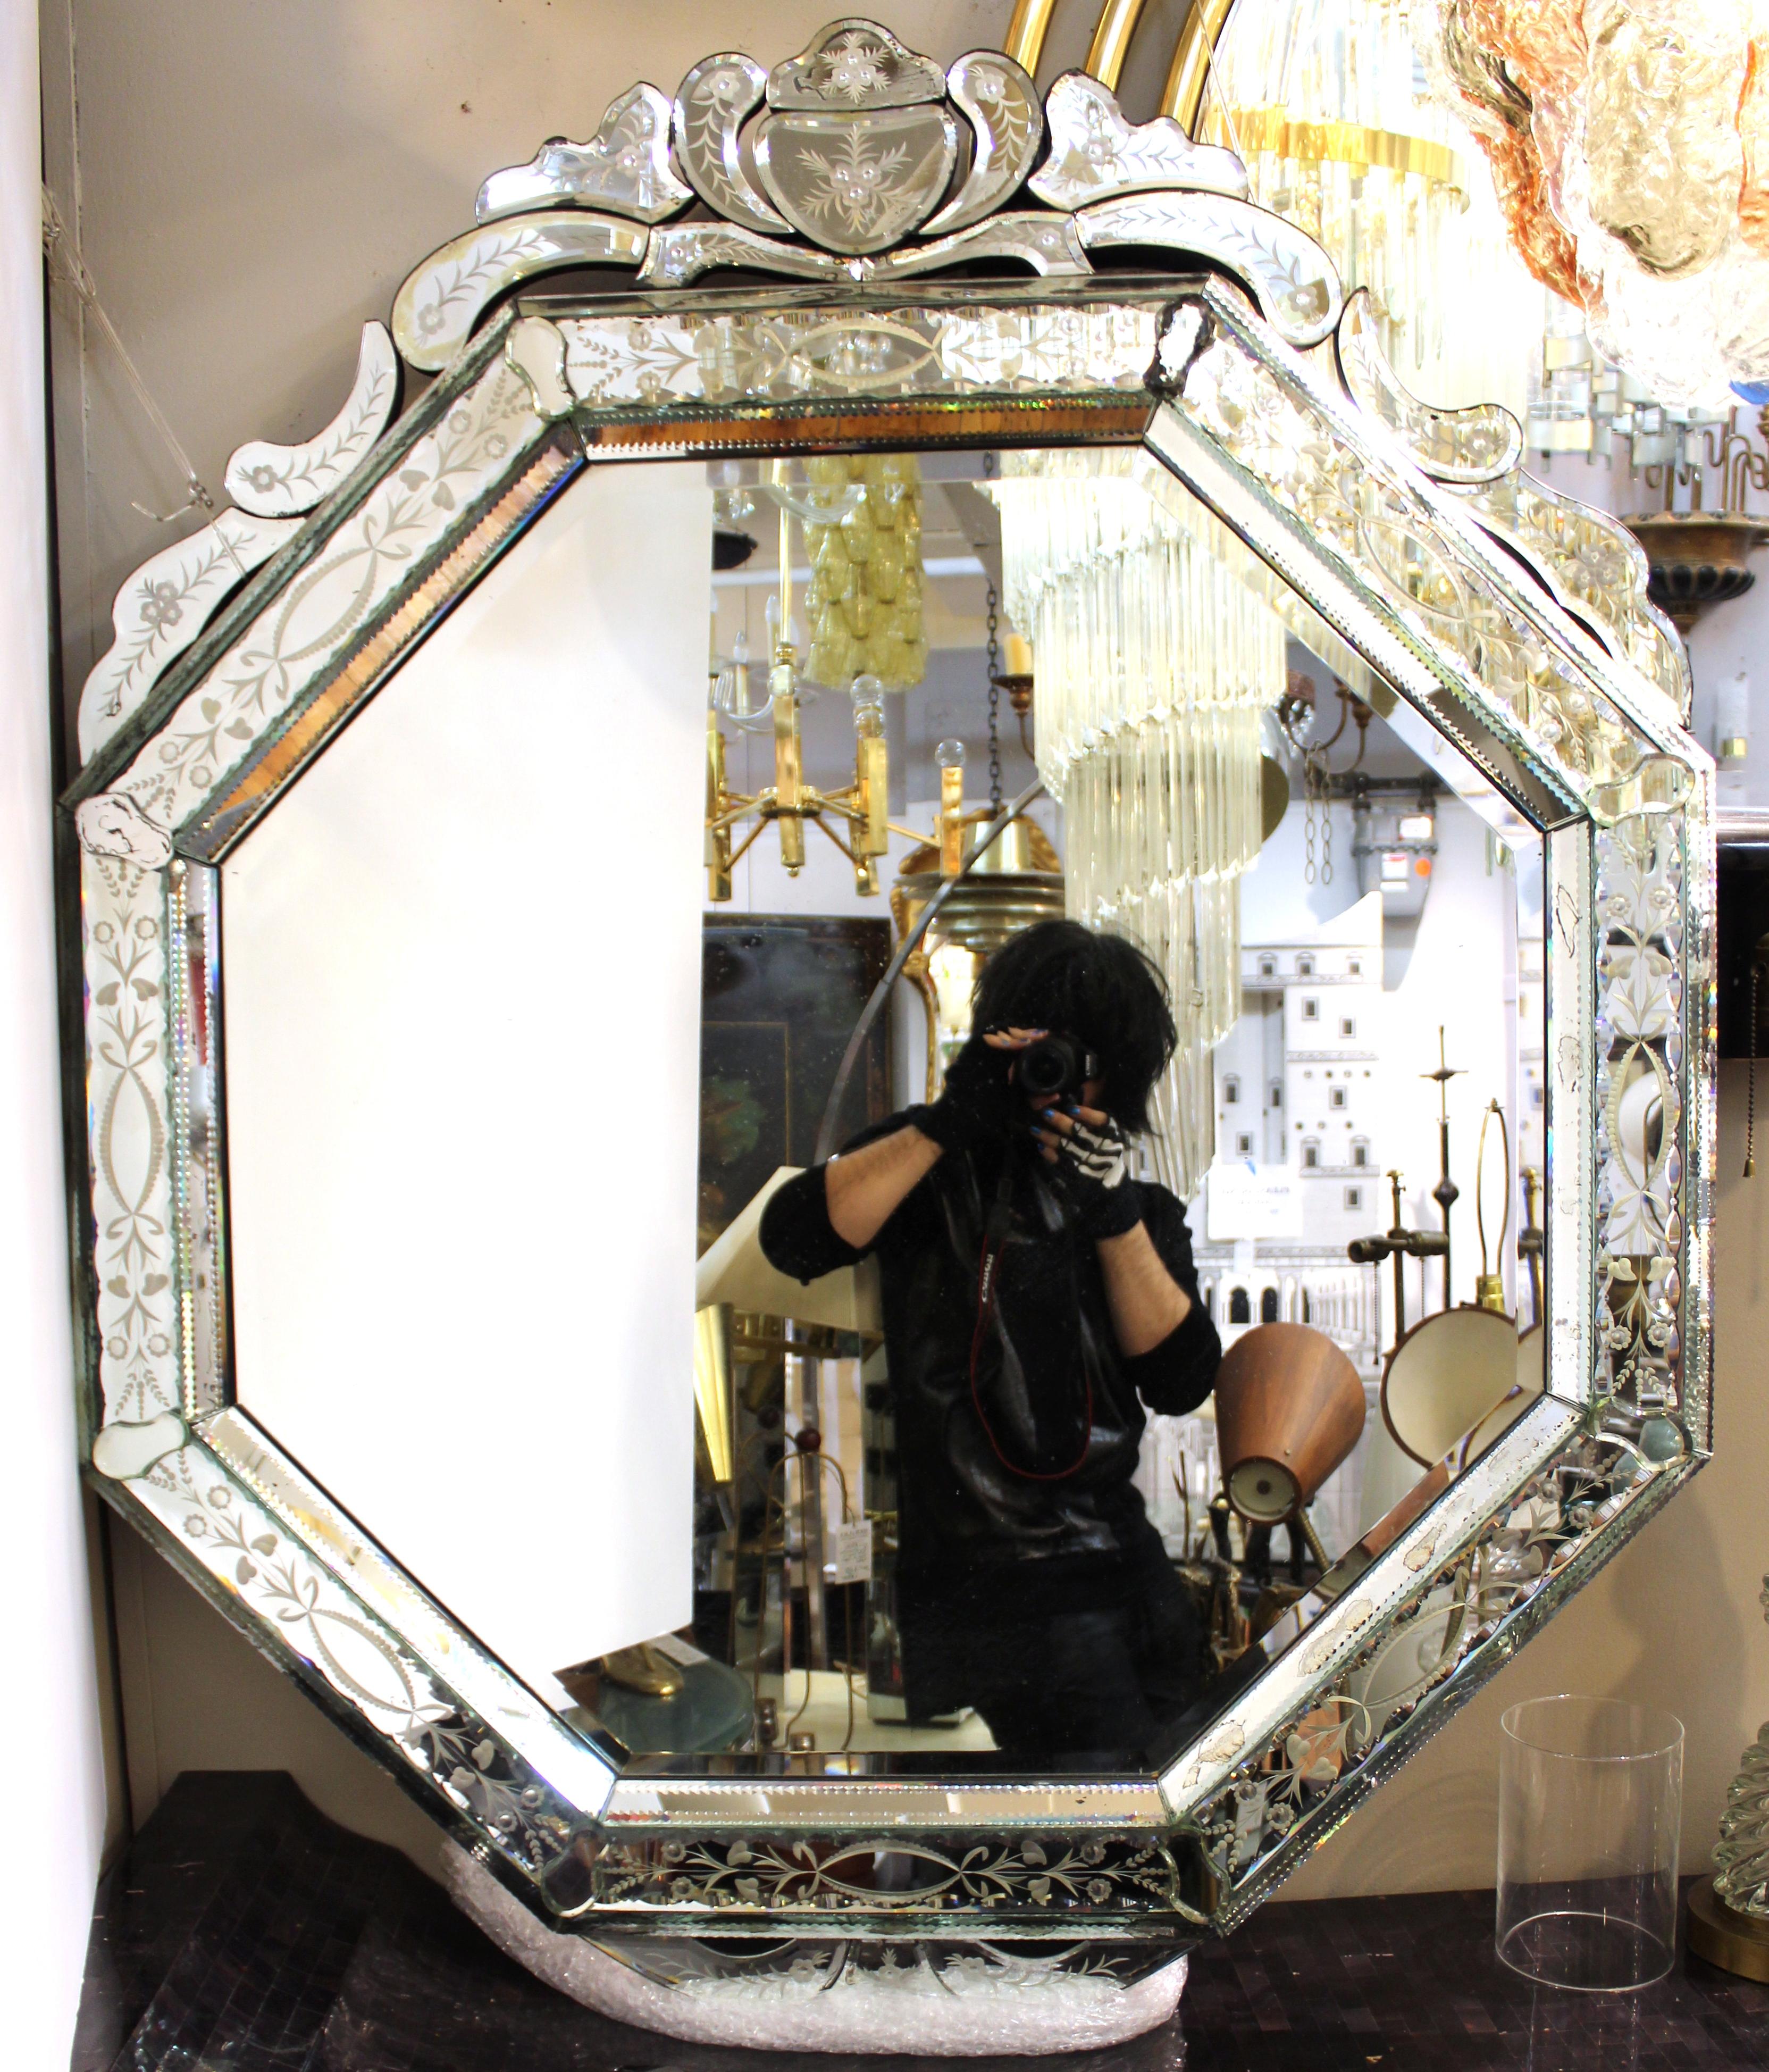 Italian Hollywood Regency period wall mirror in octagonal shape, with a highly decorative border with etched floral designs and a crest on the top. The piece was made in Venice during the early 20th century and is in great vintage condition with